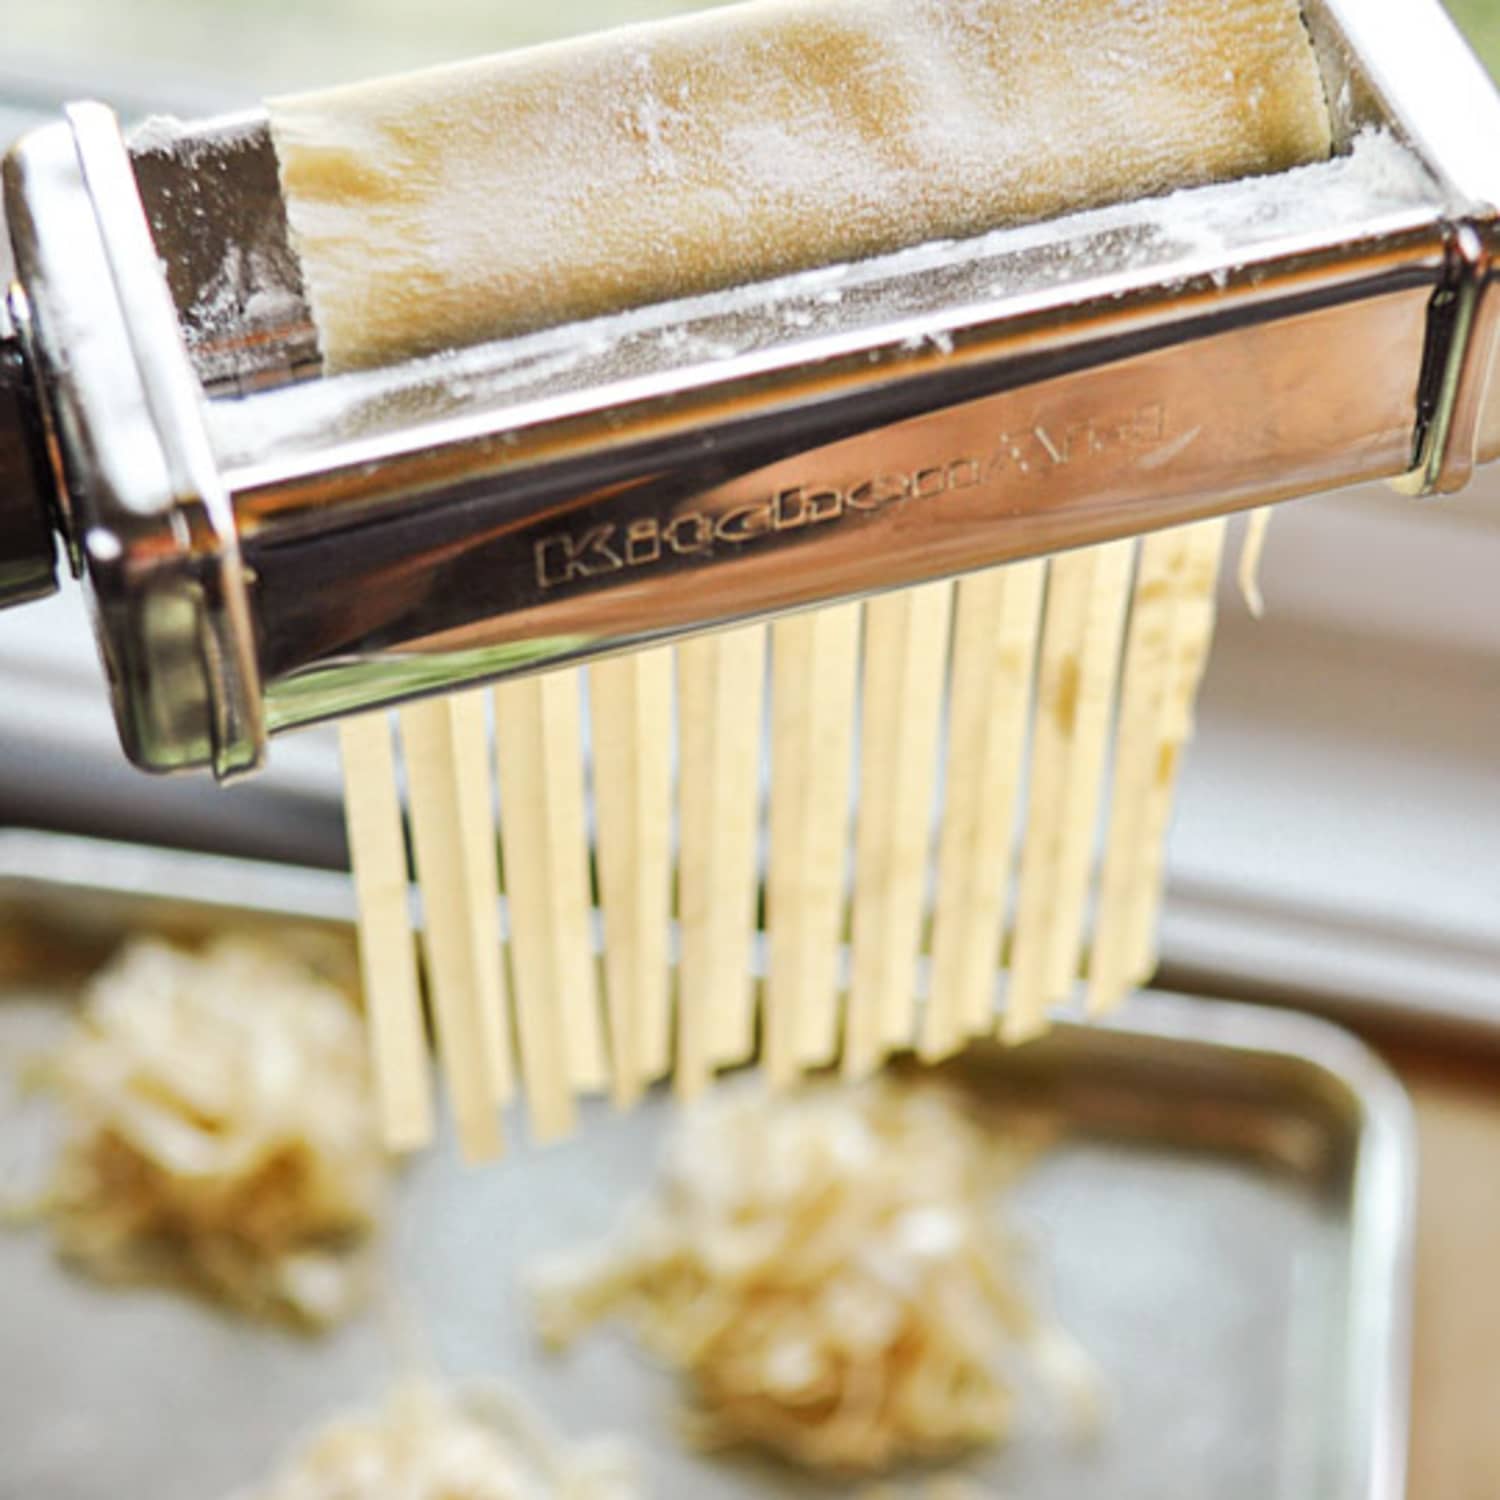 Should I be using a different dough with the pasta extruder? My